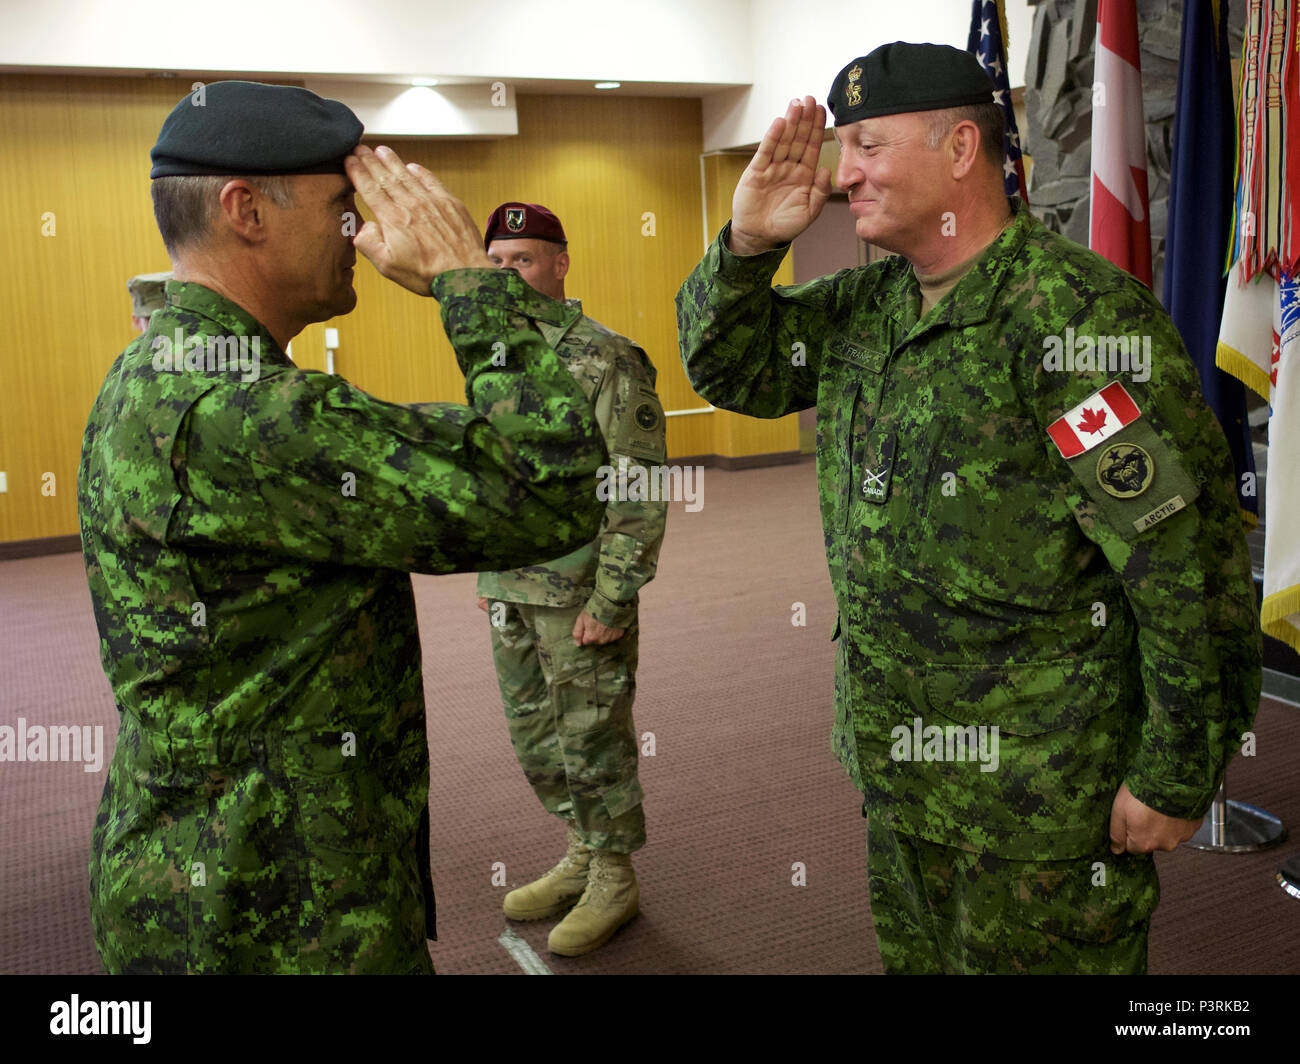 Canadian Army Brig. Gen. Martin Frank (right), U.S. Army Alaska deputy commander - operations, salutes Canadian Army Maj. Gen. J.C.G. Juneau, Canadian Army deputy commander, during the newly minted brigadier general's July 22 promotion at Joint Base Elmendorf-Richardson. Martin will soon take an assignment in Canada. (U.S. Air Force photo by David Bedard) Stock Photo